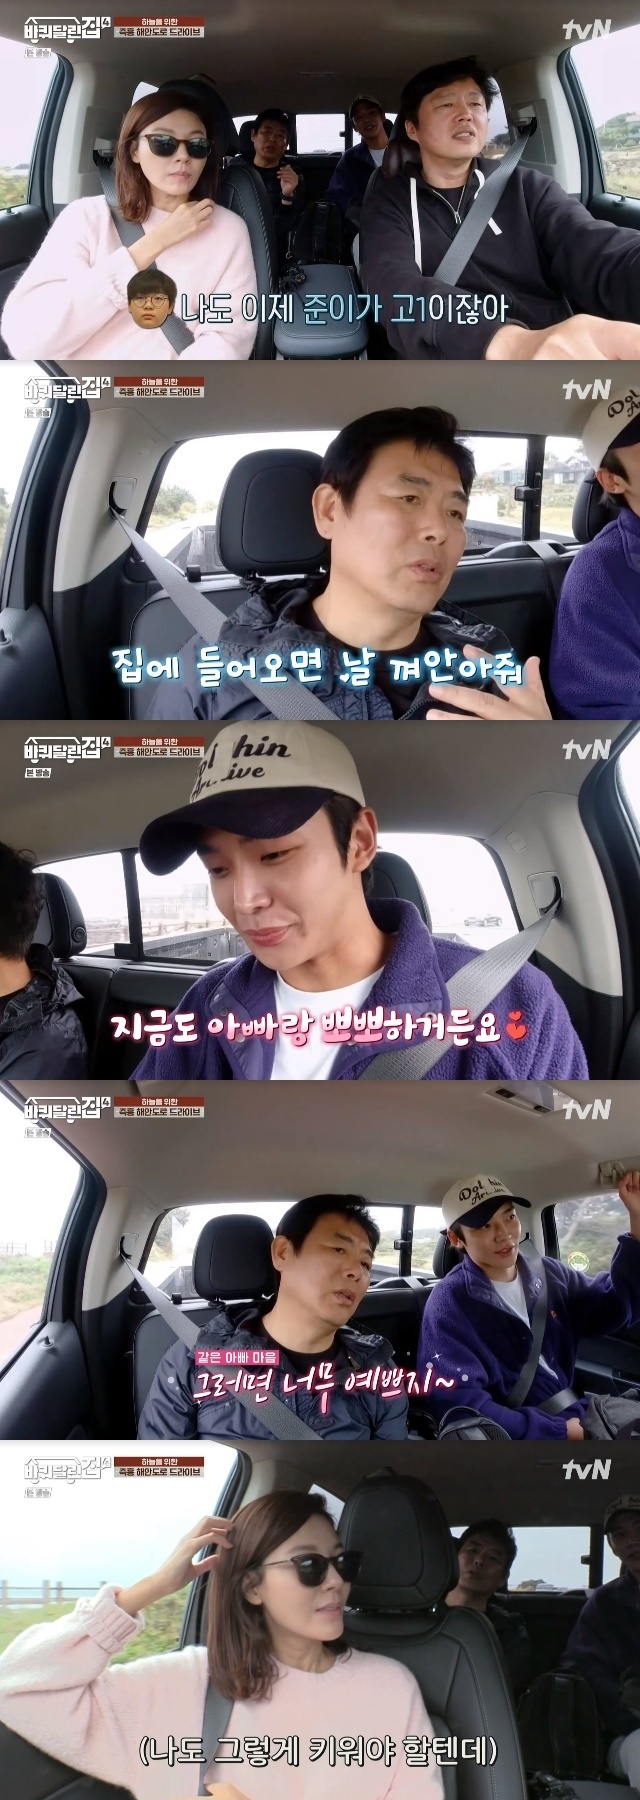 It mentioned Sung Dong-ils son Sung Joon who went to Daegu Science High School.Jeju Island Travel with Actor Kim Ha-neul was followed in the fourth episode of tvNs entertainment show House on Wheels 4 (hereinafter referred to as Badal House 4), which aired on November 3.On this day, RO WOON ran a car on the Jeju Island coast road and found a cafe and shouted that it was where he stopped with his mother.Sung Dong-il was reminded of his son, Jun-i, when his parents mentioned RO WOON, and he boasted, Im a senior in high school, too. When I come home, he always hugs me. Thats how good it feels.RO WOON said, I still kiss my dad, and Kim Ha-neul recalled his young daughter, saying, Ill have to raise it like that.Sung Dong-il said that his son Jun-yi is too beautiful and How much more will your father do? RO WOON said, There is a surprise.